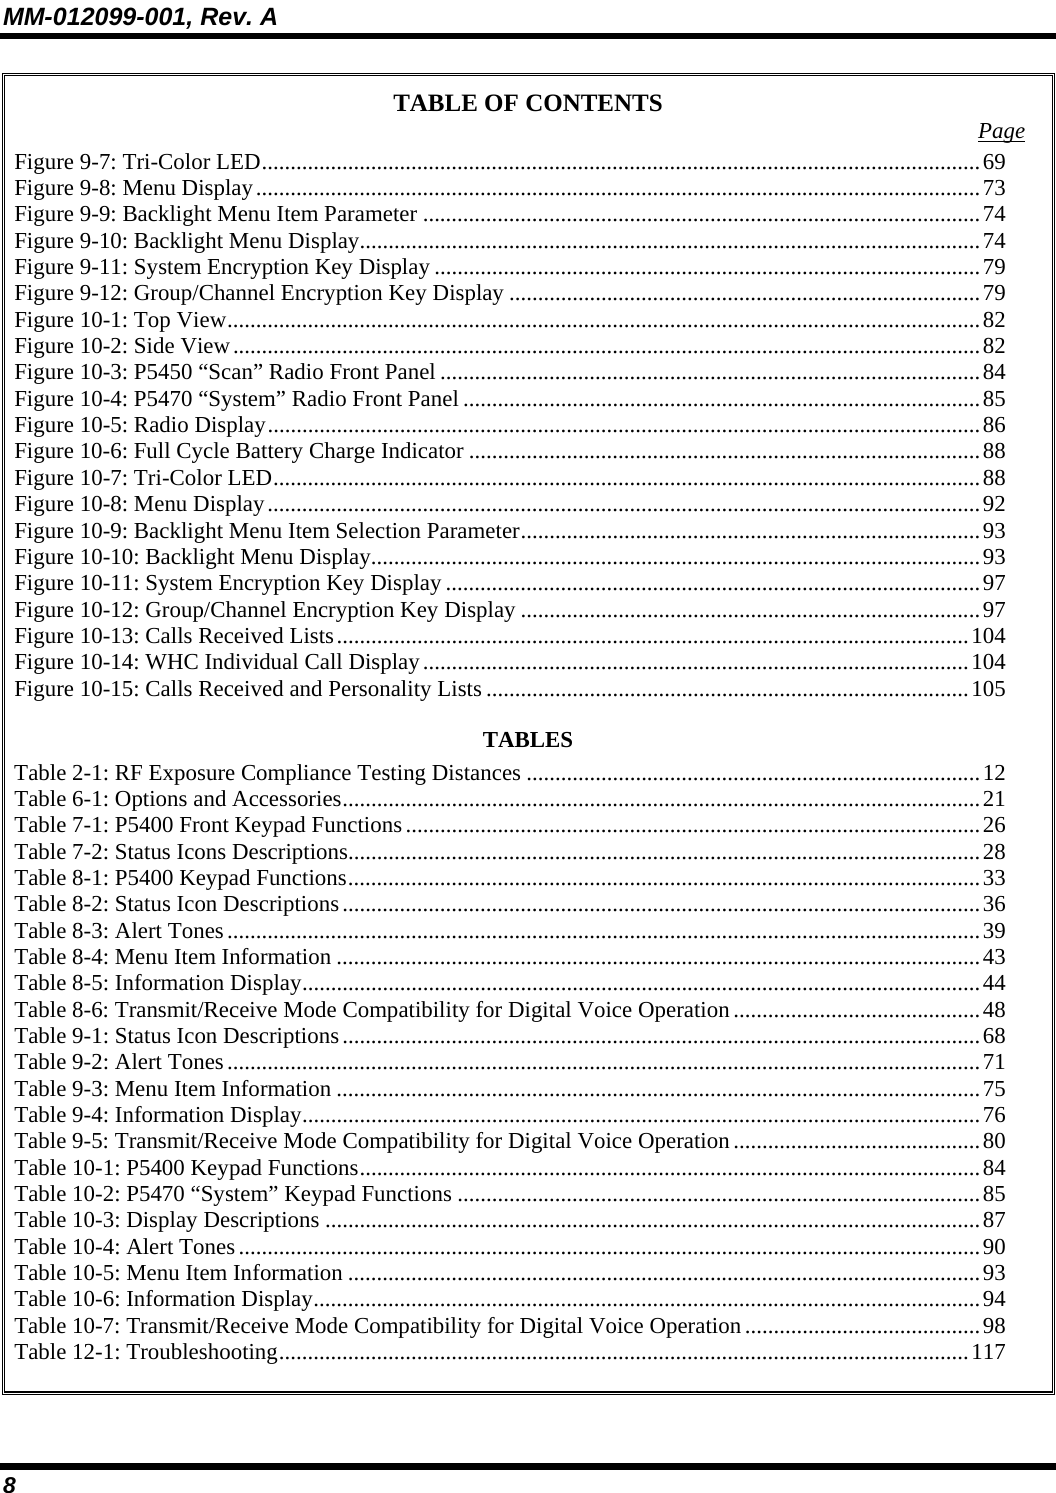 MM-012099-001, Rev. A 8 TABLE OF CONTENTS  Page Figure 9-7: Tri-Color LED.............................................................................................................................69 Figure 9-8: Menu Display..............................................................................................................................73 Figure 9-9: Backlight Menu Item Parameter .................................................................................................74 Figure 9-10: Backlight Menu Display............................................................................................................74 Figure 9-11: System Encryption Key Display ...............................................................................................79 Figure 9-12: Group/Channel Encryption Key Display ..................................................................................79 Figure 10-1: Top View...................................................................................................................................82 Figure 10-2: Side View..................................................................................................................................82 Figure 10-3: P5450 “Scan” Radio Front Panel ..............................................................................................84 Figure 10-4: P5470 “System” Radio Front Panel ..........................................................................................85 Figure 10-5: Radio Display............................................................................................................................86 Figure 10-6: Full Cycle Battery Charge Indicator .........................................................................................88 Figure 10-7: Tri-Color LED...........................................................................................................................88 Figure 10-8: Menu Display............................................................................................................................92 Figure 10-9: Backlight Menu Item Selection Parameter................................................................................93 Figure 10-10: Backlight Menu Display..........................................................................................................93 Figure 10-11: System Encryption Key Display .............................................................................................97 Figure 10-12: Group/Channel Encryption Key Display ................................................................................97 Figure 10-13: Calls Received Lists..............................................................................................................104 Figure 10-14: WHC Individual Call Display...............................................................................................104 Figure 10-15: Calls Received and Personality Lists ....................................................................................105 TABLES Table 2-1: RF Exposure Compliance Testing Distances ...............................................................................12 Table 6-1: Options and Accessories...............................................................................................................21 Table 7-1: P5400 Front Keypad Functions....................................................................................................26 Table 7-2: Status Icons Descriptions..............................................................................................................28 Table 8-1: P5400 Keypad Functions..............................................................................................................33 Table 8-2: Status Icon Descriptions...............................................................................................................36 Table 8-3: Alert Tones...................................................................................................................................39 Table 8-4: Menu Item Information ................................................................................................................43 Table 8-5: Information Display......................................................................................................................44 Table 8-6: Transmit/Receive Mode Compatibility for Digital Voice Operation...........................................48 Table 9-1: Status Icon Descriptions...............................................................................................................68 Table 9-2: Alert Tones...................................................................................................................................71 Table 9-3: Menu Item Information ................................................................................................................75 Table 9-4: Information Display......................................................................................................................76 Table 9-5: Transmit/Receive Mode Compatibility for Digital Voice Operation...........................................80 Table 10-1: P5400 Keypad Functions............................................................................................................84 Table 10-2: P5470 “System” Keypad Functions ...........................................................................................85 Table 10-3: Display Descriptions ..................................................................................................................87 Table 10-4: Alert Tones.................................................................................................................................90 Table 10-5: Menu Item Information ..............................................................................................................93 Table 10-6: Information Display....................................................................................................................94 Table 10-7: Transmit/Receive Mode Compatibility for Digital Voice Operation.........................................98 Table 12-1: Troubleshooting........................................................................................................................117   